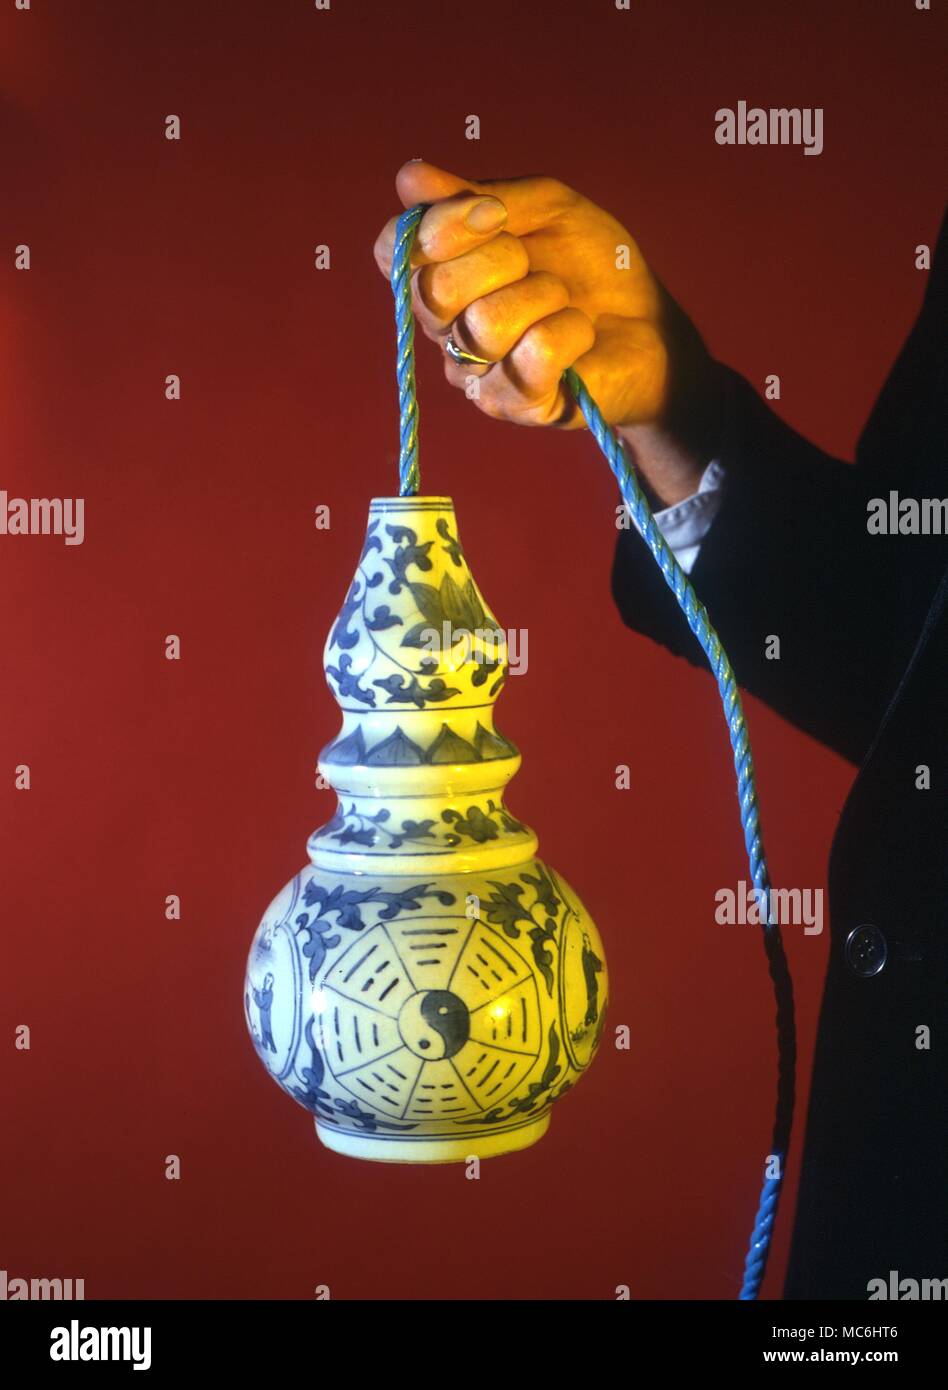 Stage Magic - Magic Rope. Magician puts the end of a rope into a bowl. The rope will not come out and even hold the bowl, until he commands it to let go. Stock Photo